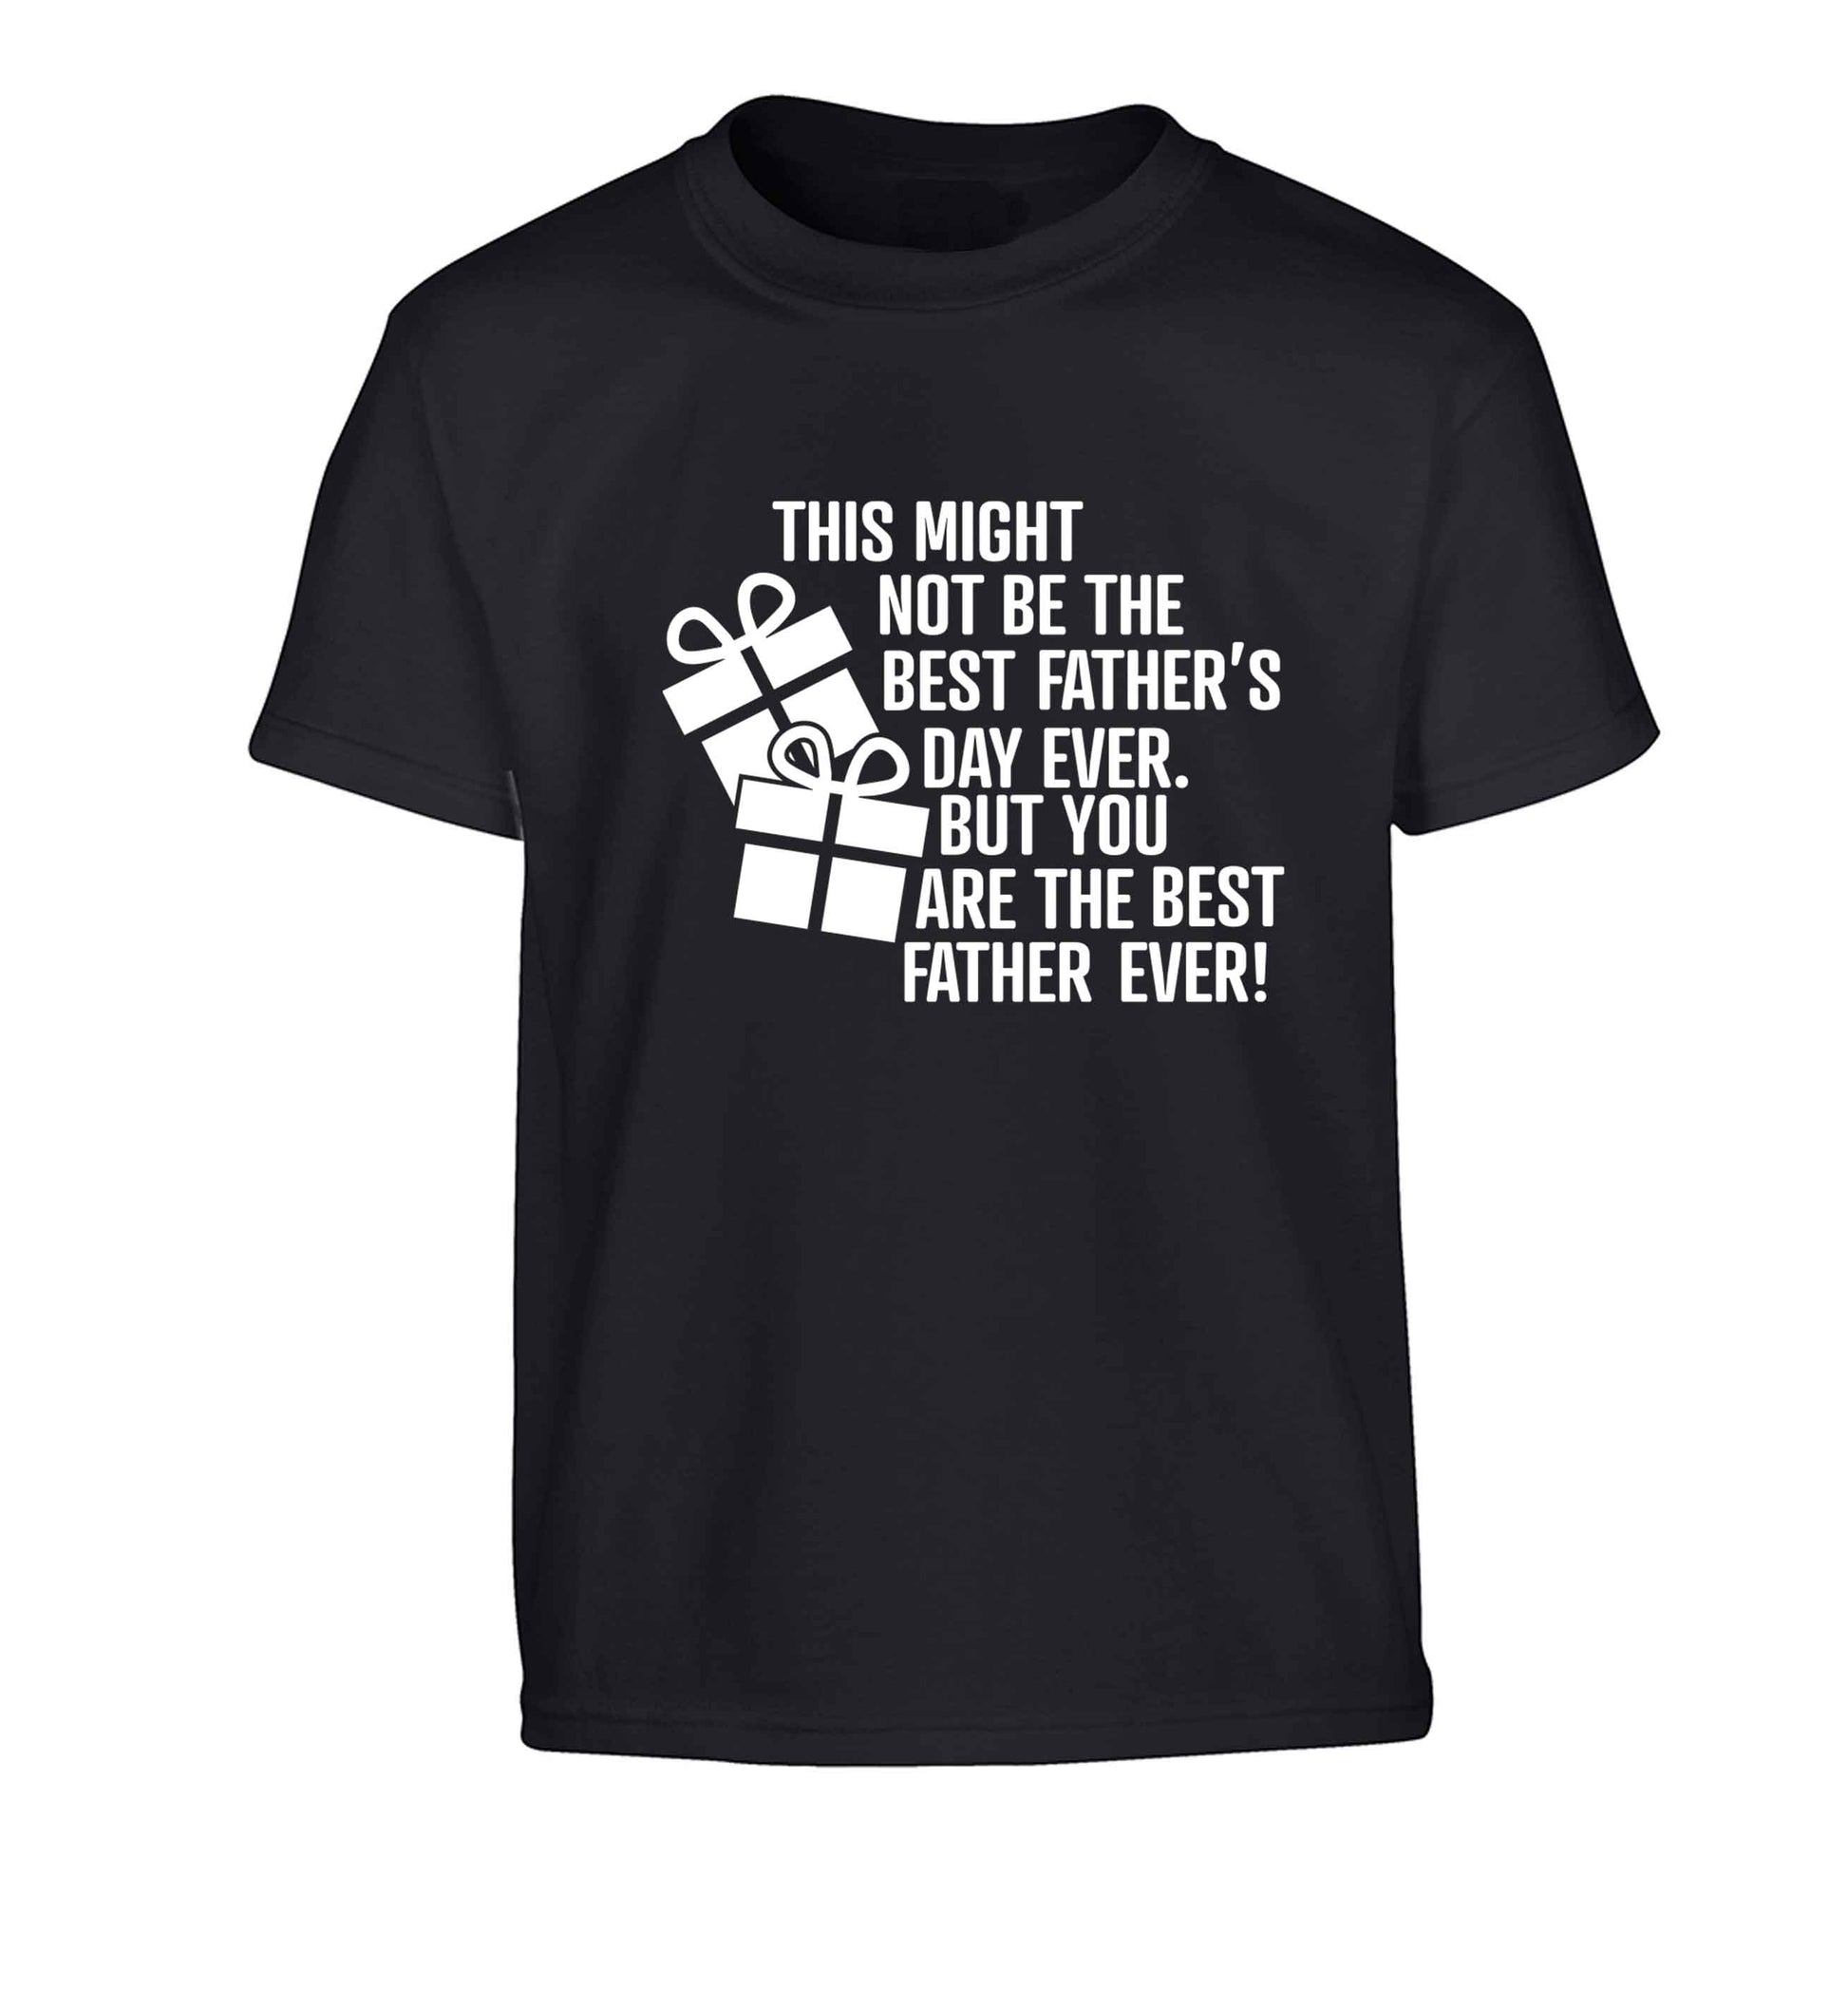 It might not be the best Father's Day ever but you are the best father ever! Children's black Tshirt 12-13 Years